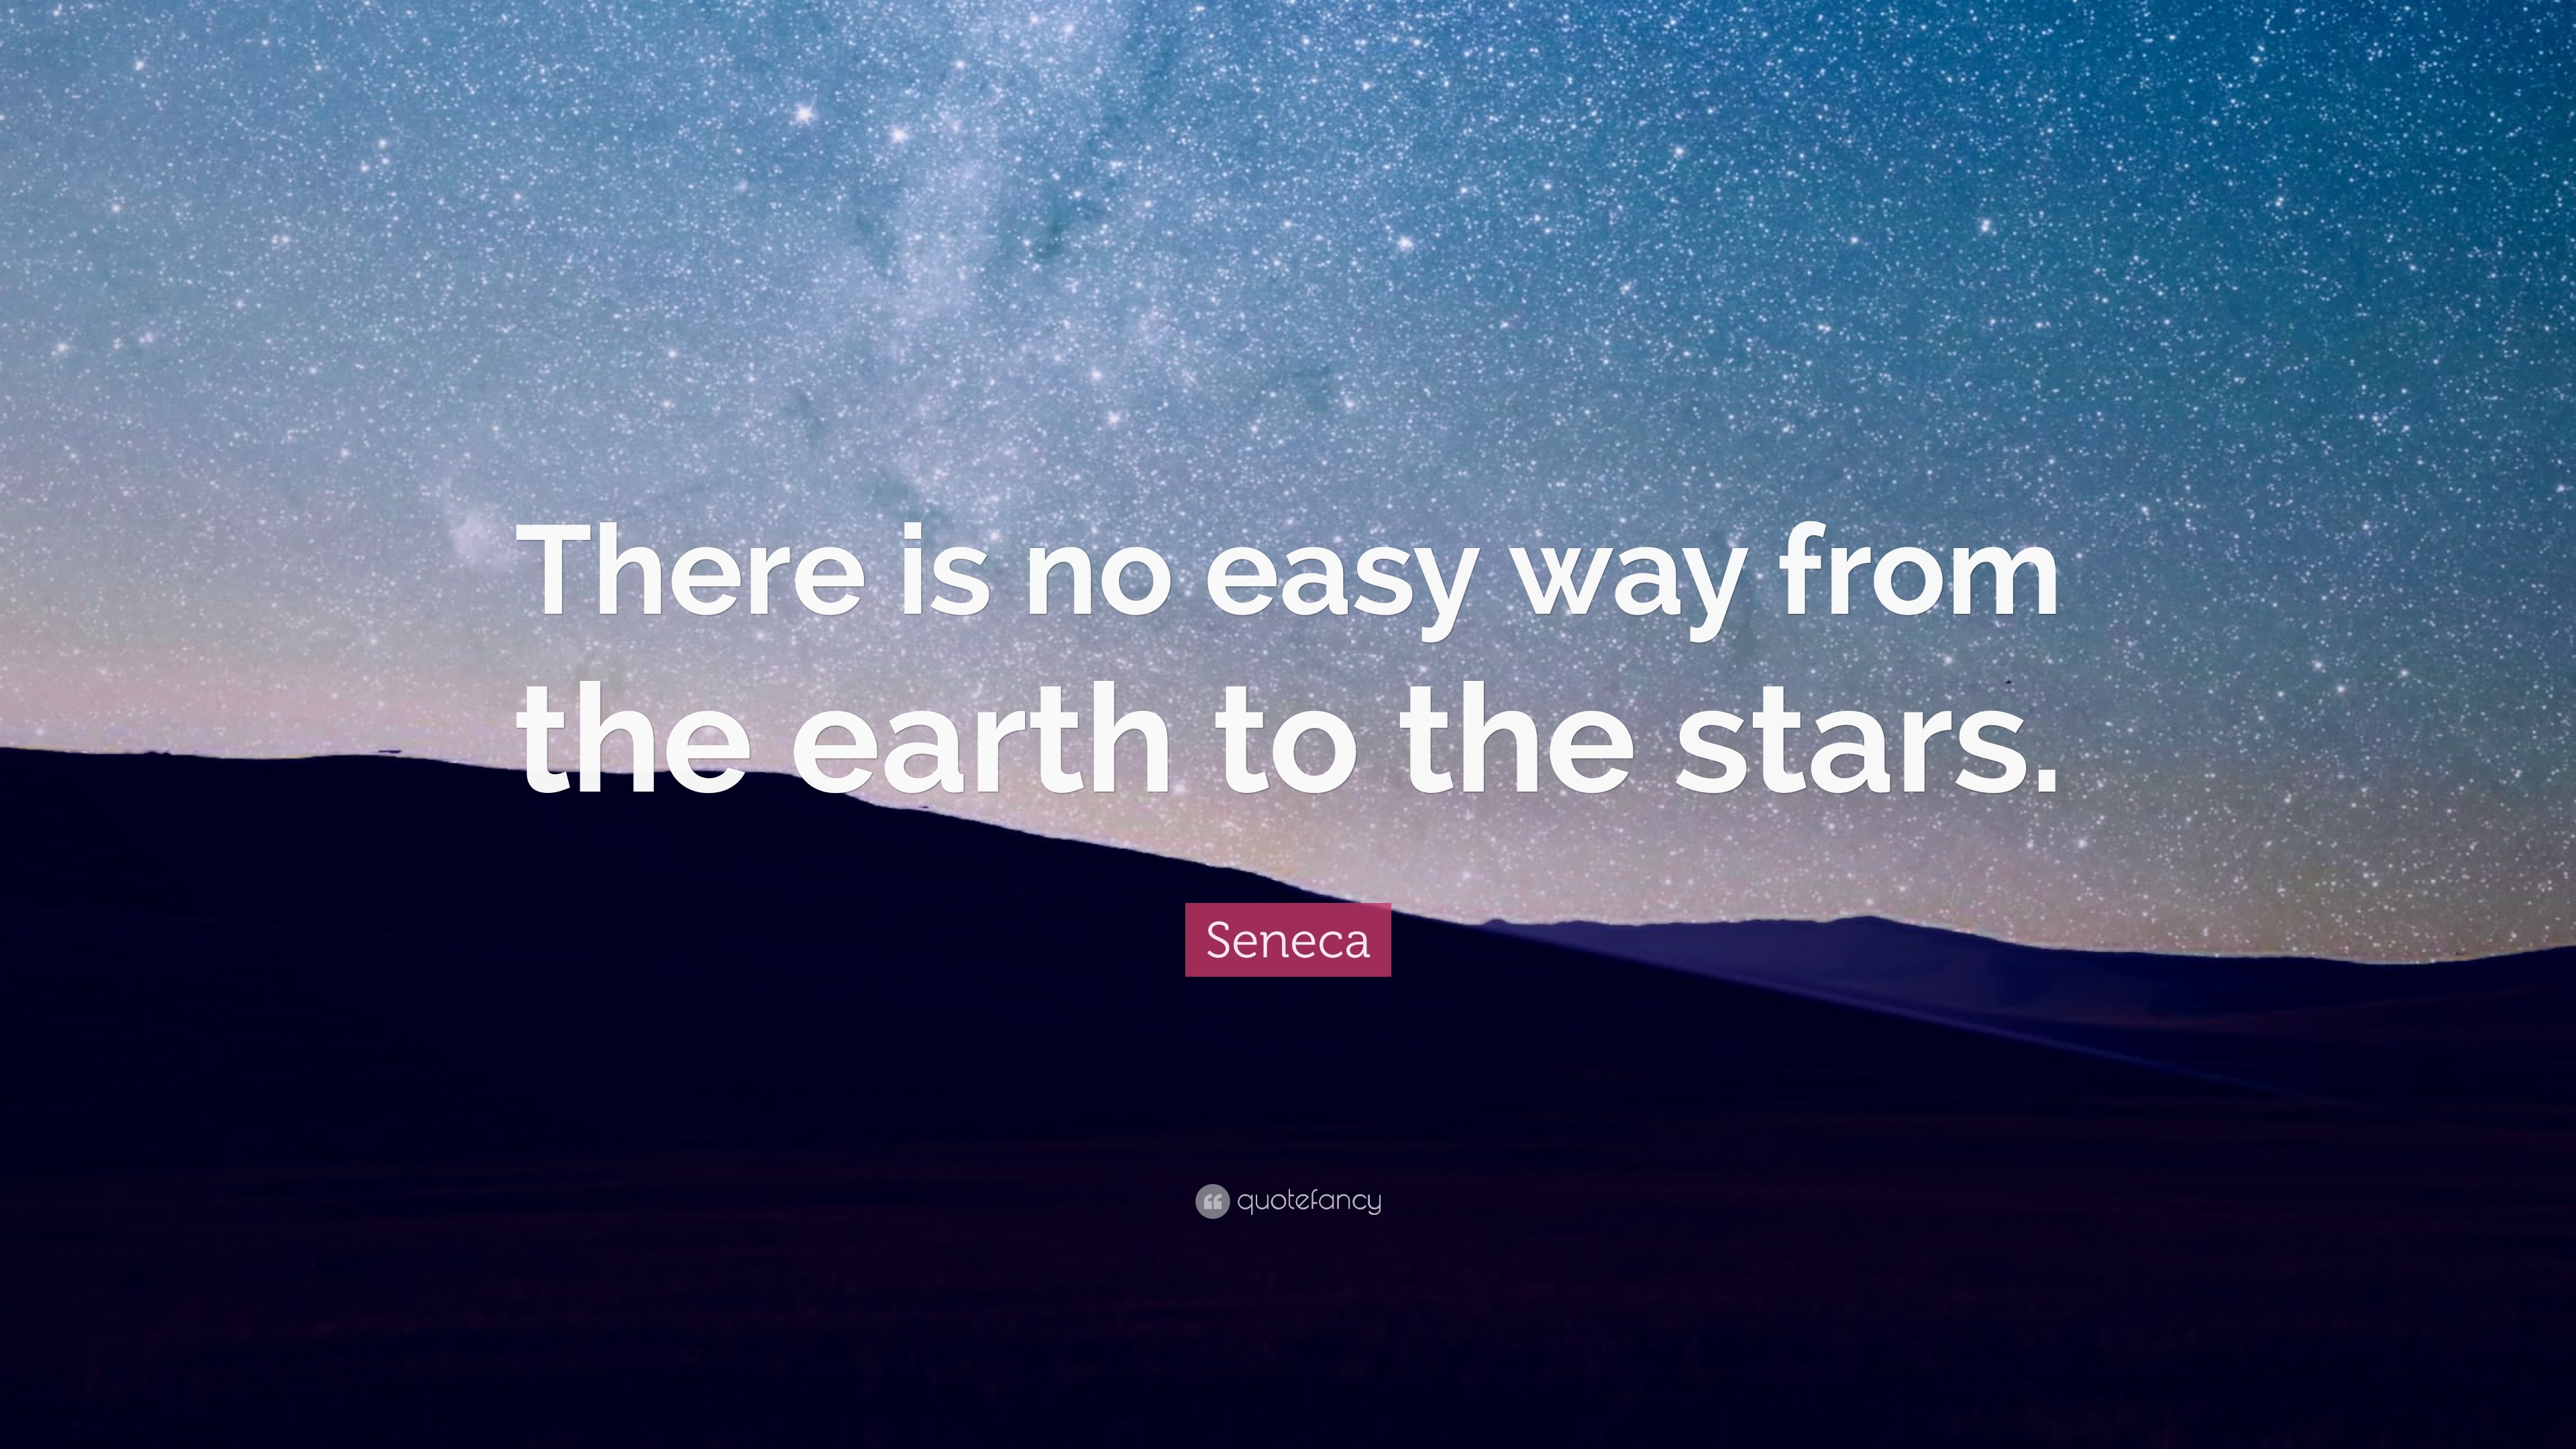 Seneca Quote: “There is no easy way from the earth to the stars.” (16